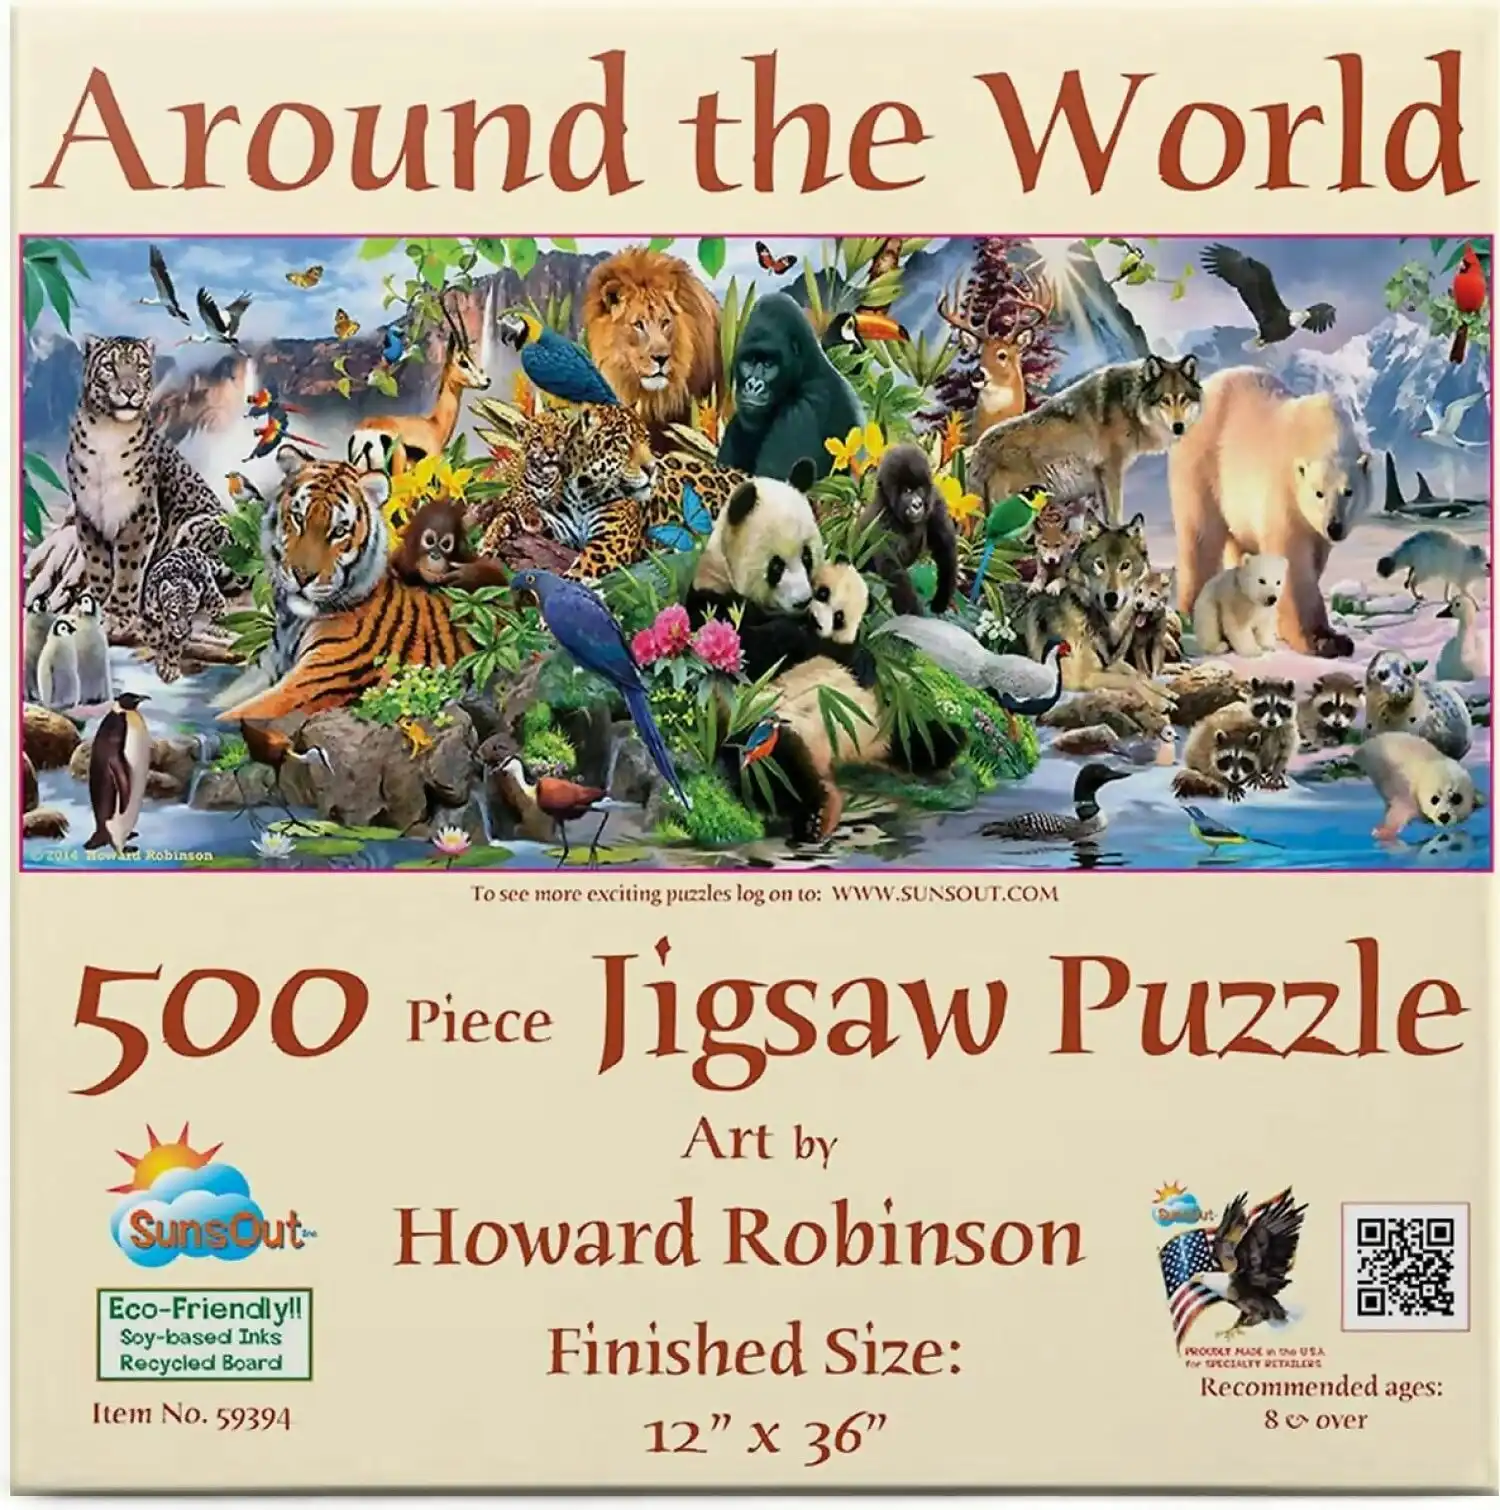 Sunsout - Around The World By Howard Robinson - Jigsaw Puzzle 500pc